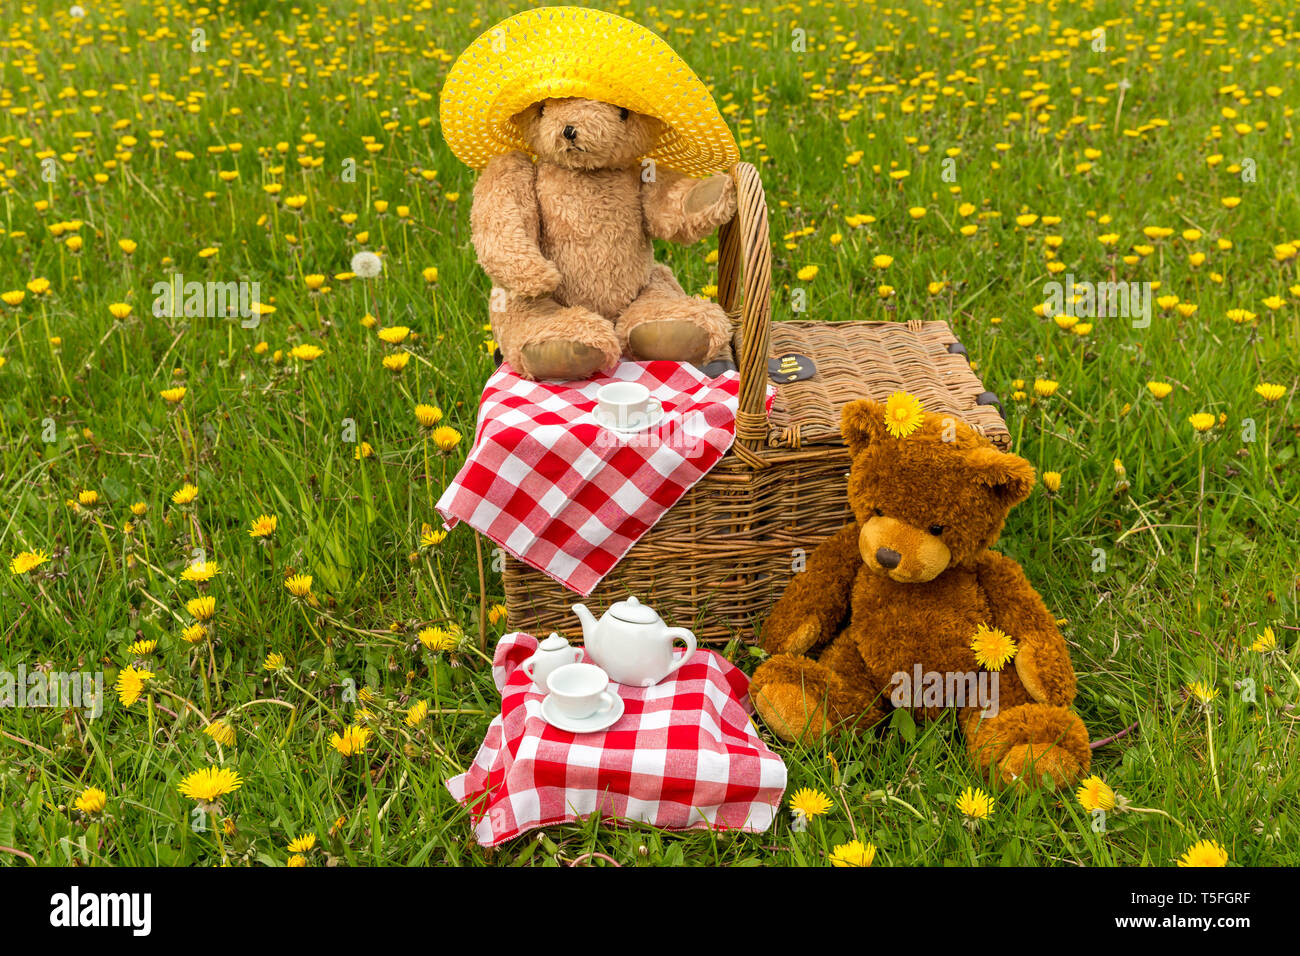 Teddy Bear's Picnic in lush green meadow with yellow flowers.  Traditional wicker basket and red gingham tablecloth.  Horizontal.  Concept: Childhood Stock Photo